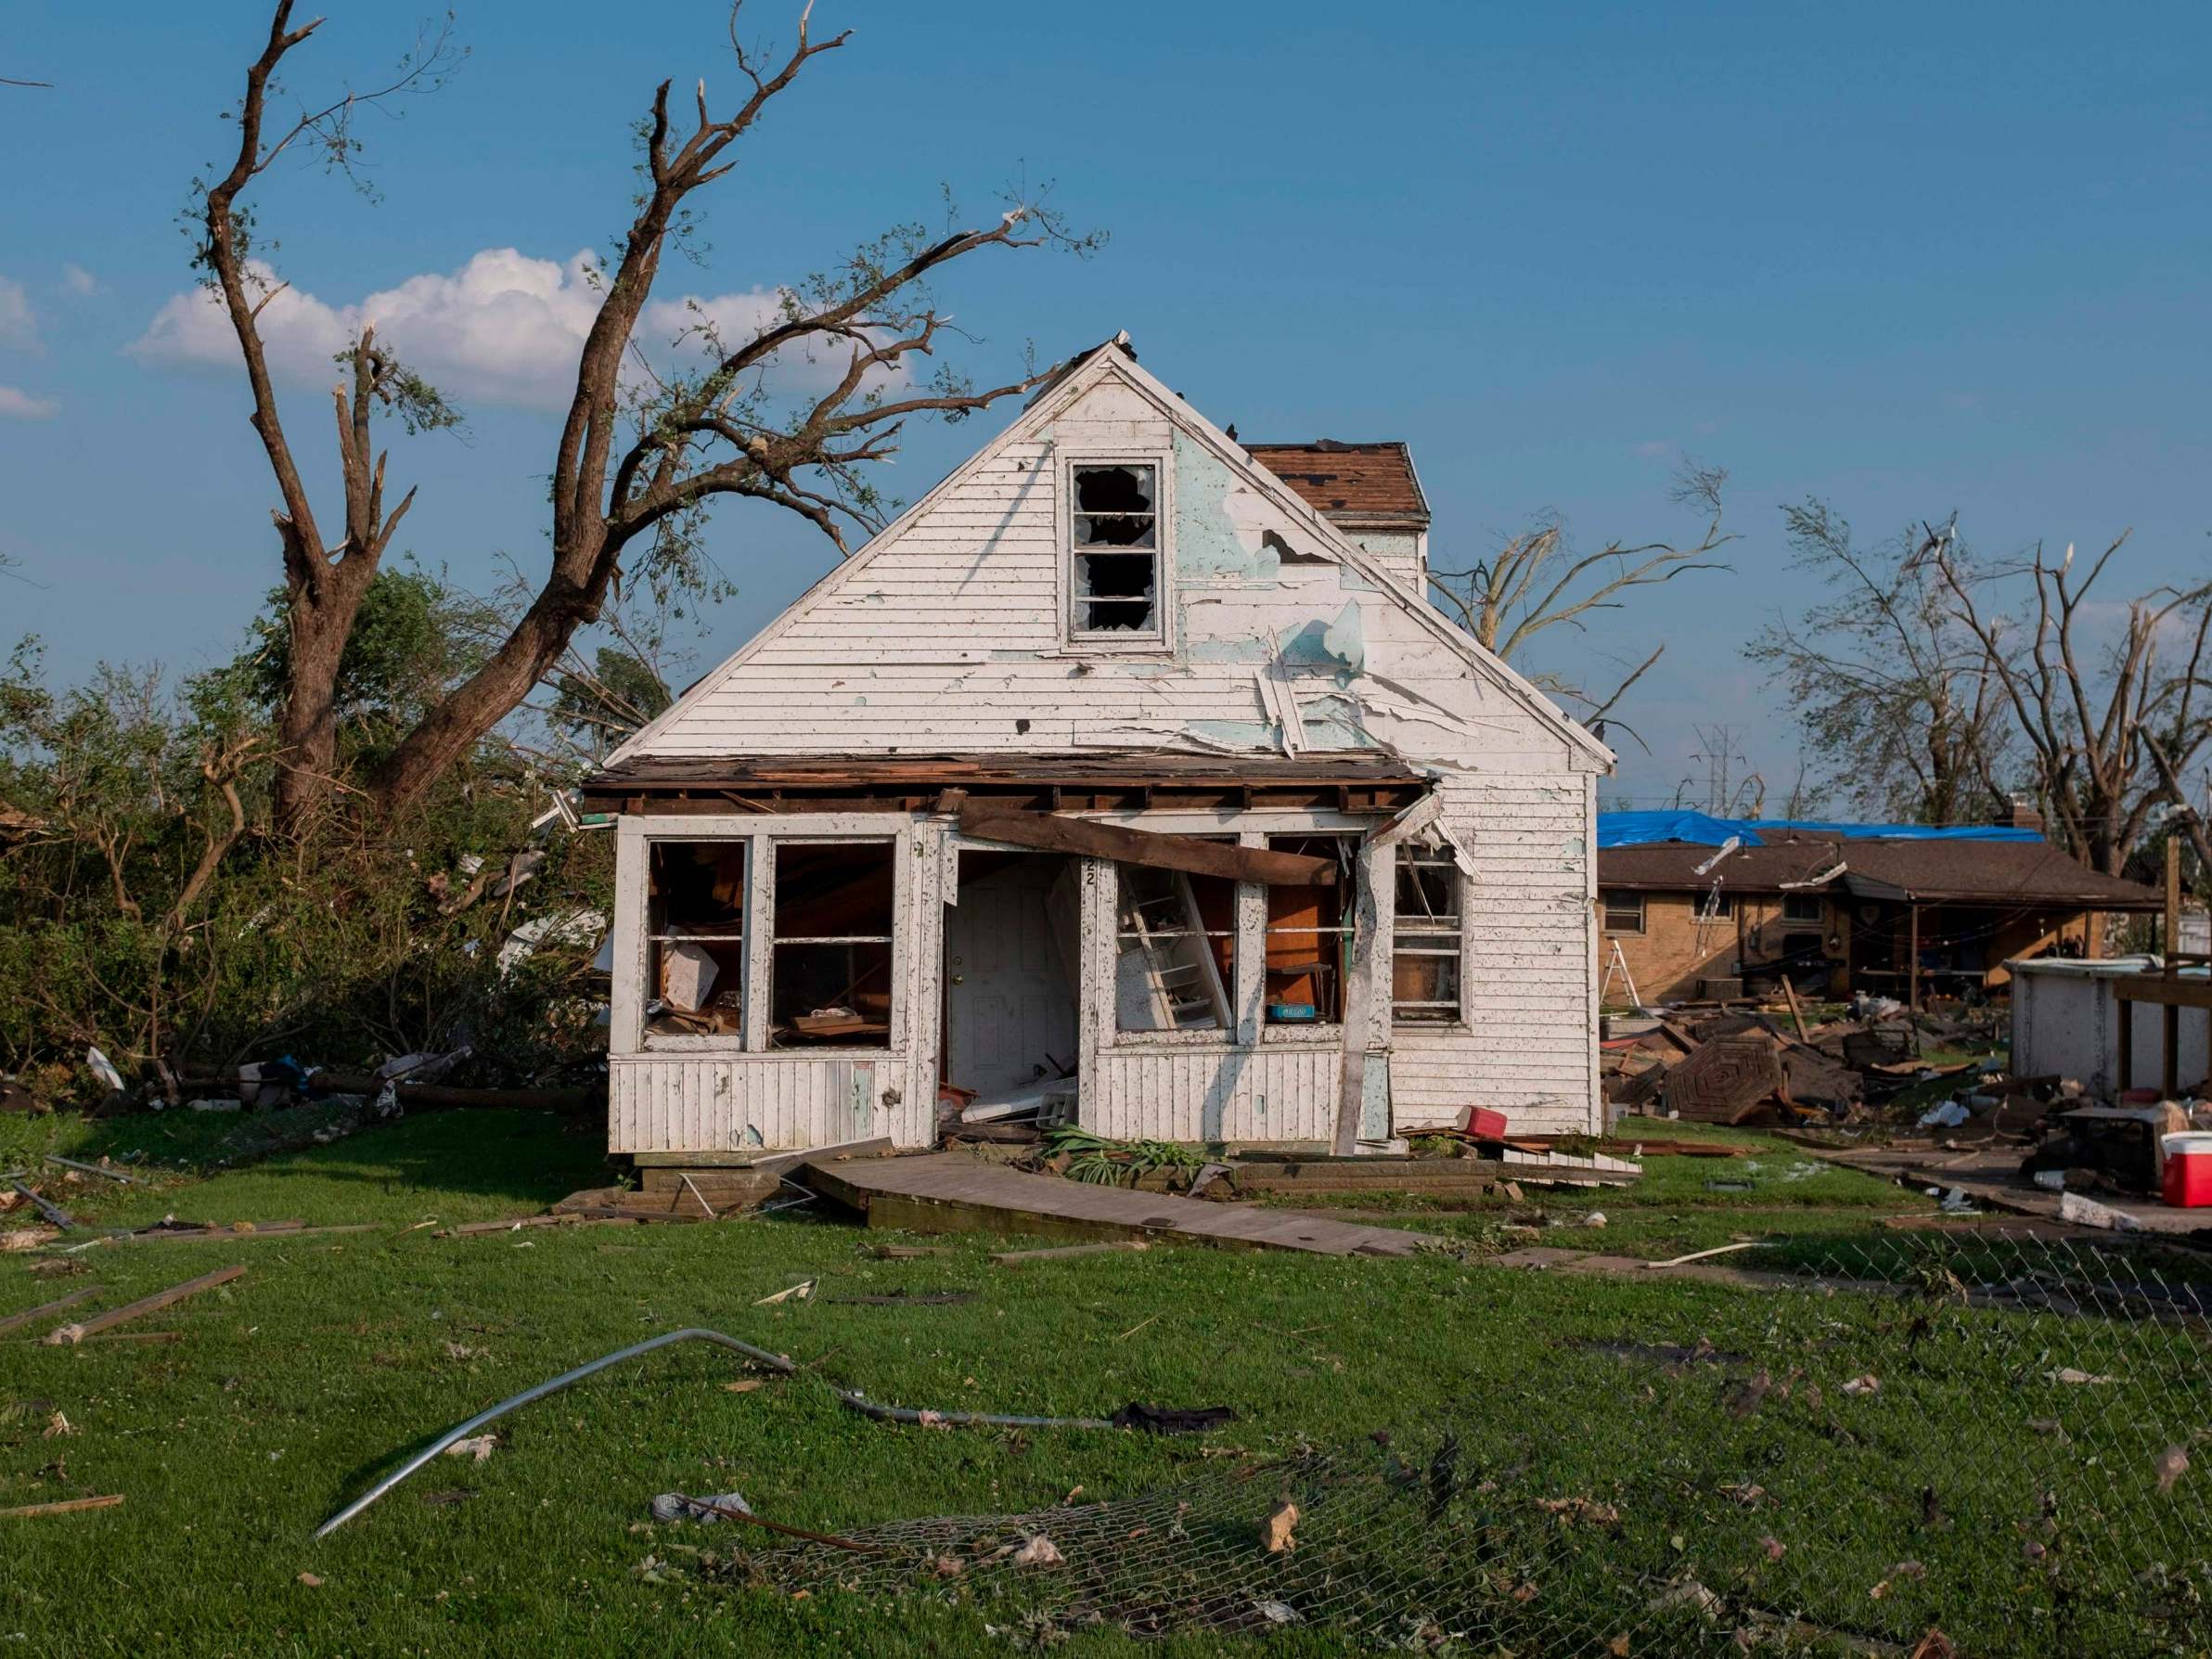 A house damaged by a tornado is seen in Dayton, Ohio on 28 May 2019, after powerful tornadoes ripped through the US state overnight, causing at least one fatality and widespread damage and power outages